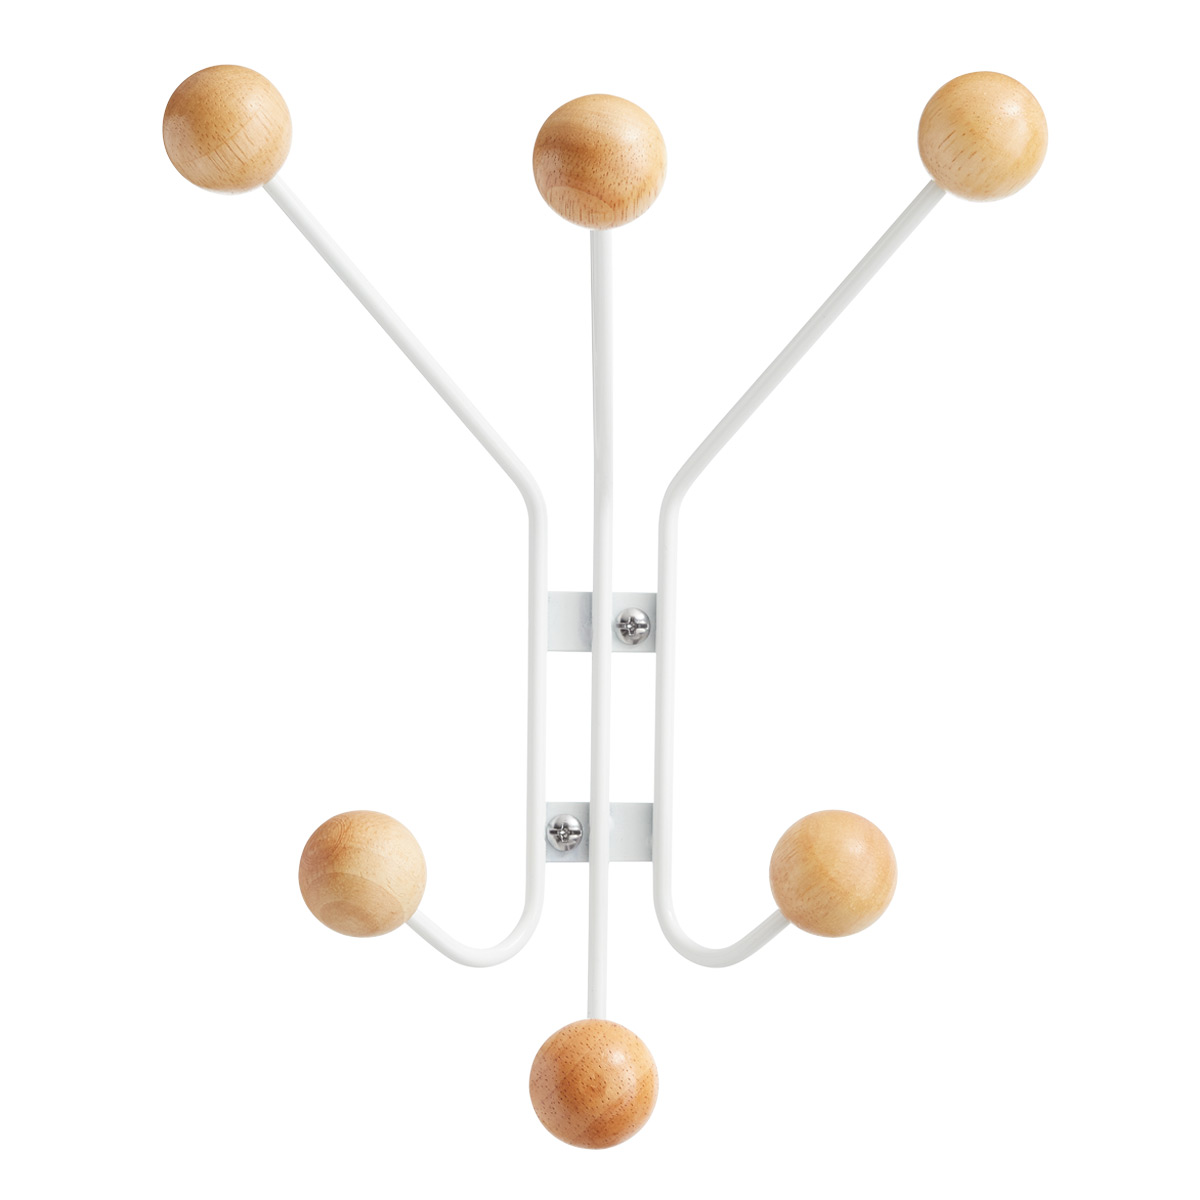 https://www.containerstore.com/catalogimages/428751/10085437_Orbit_6_Hook_Wall-Mounted_H.jpg